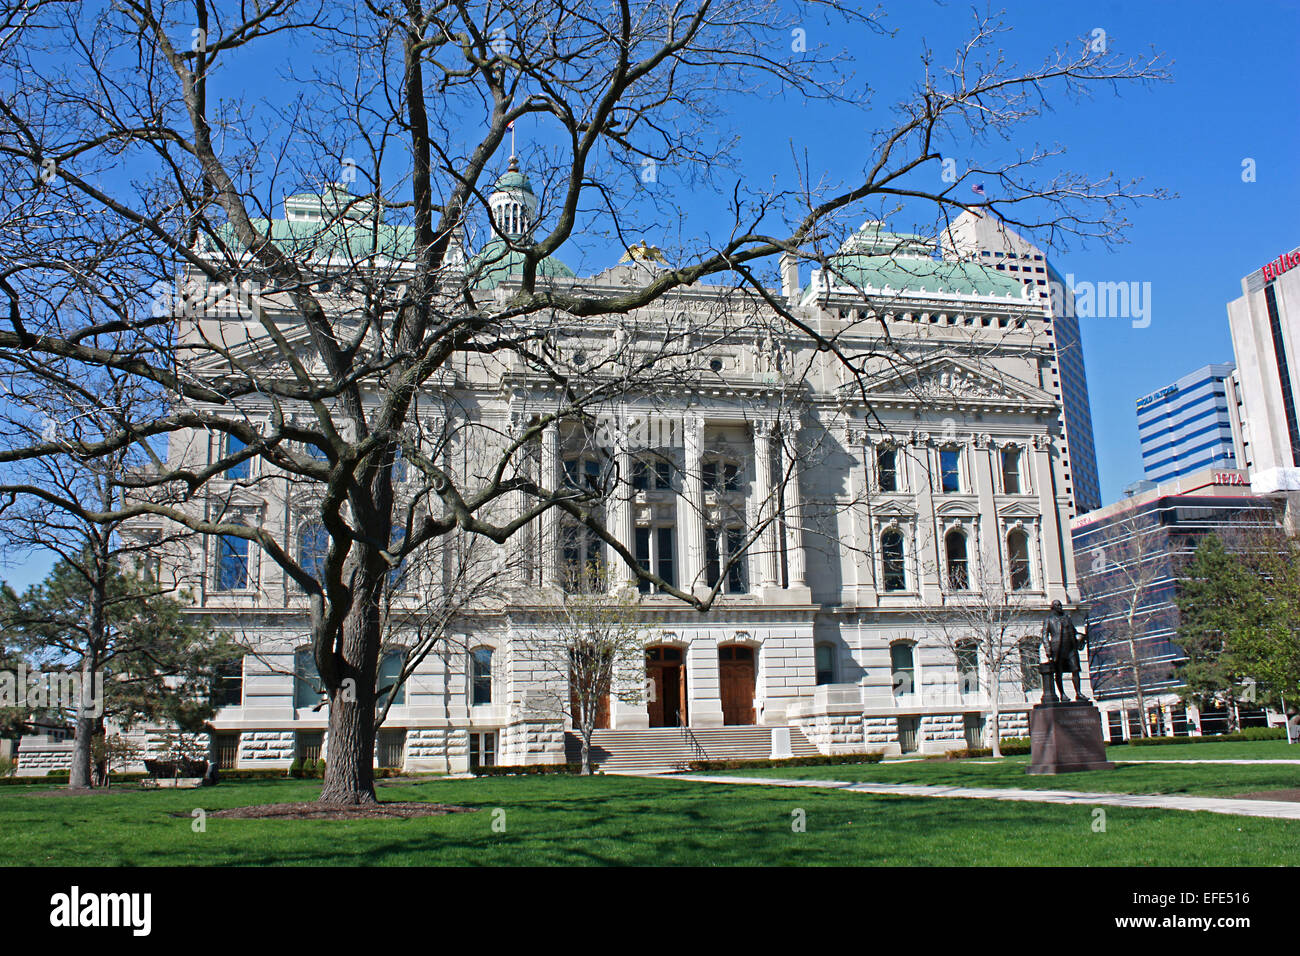 State Capital Building in Indianapolis, Indiana on a bright sunny spring day Stock Photo